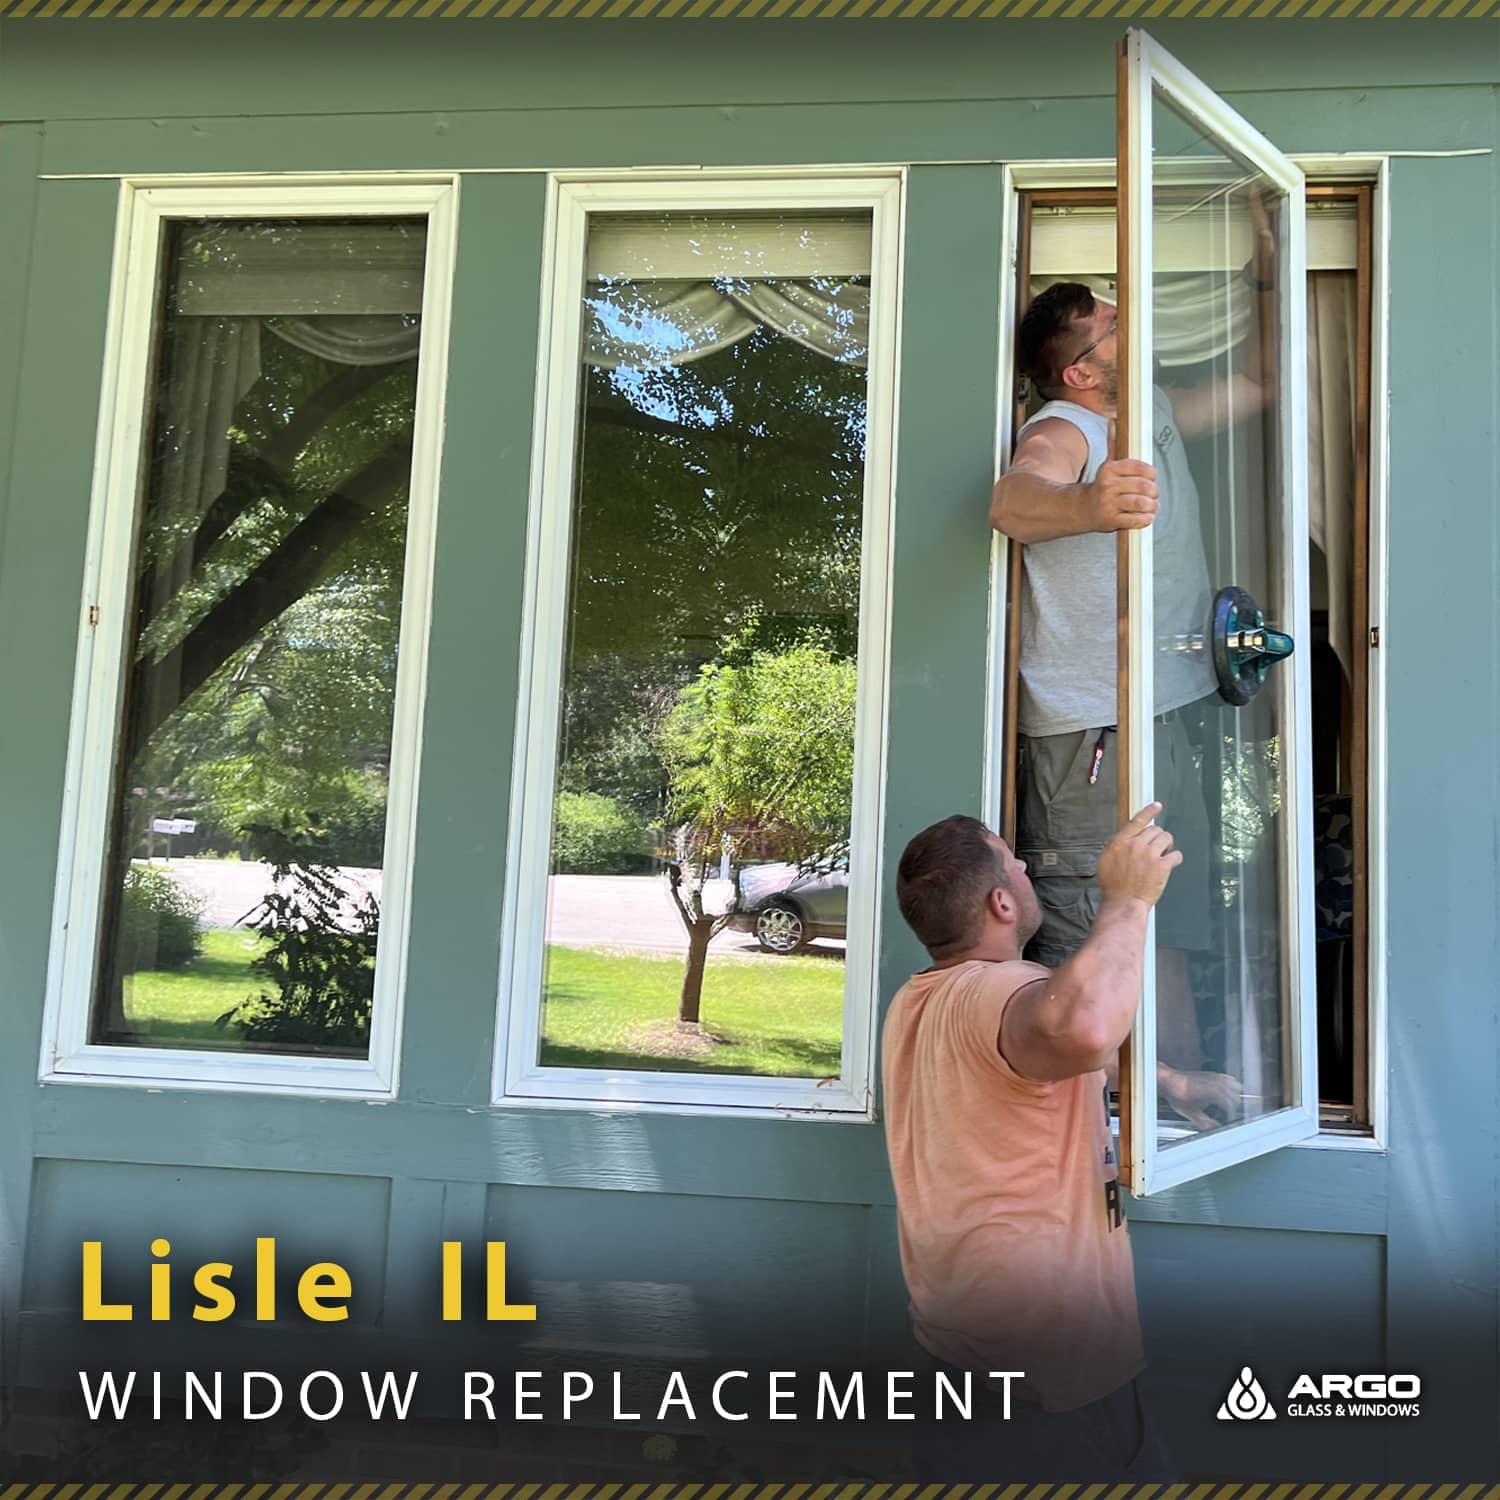 Professional Window Replacement and Installation company